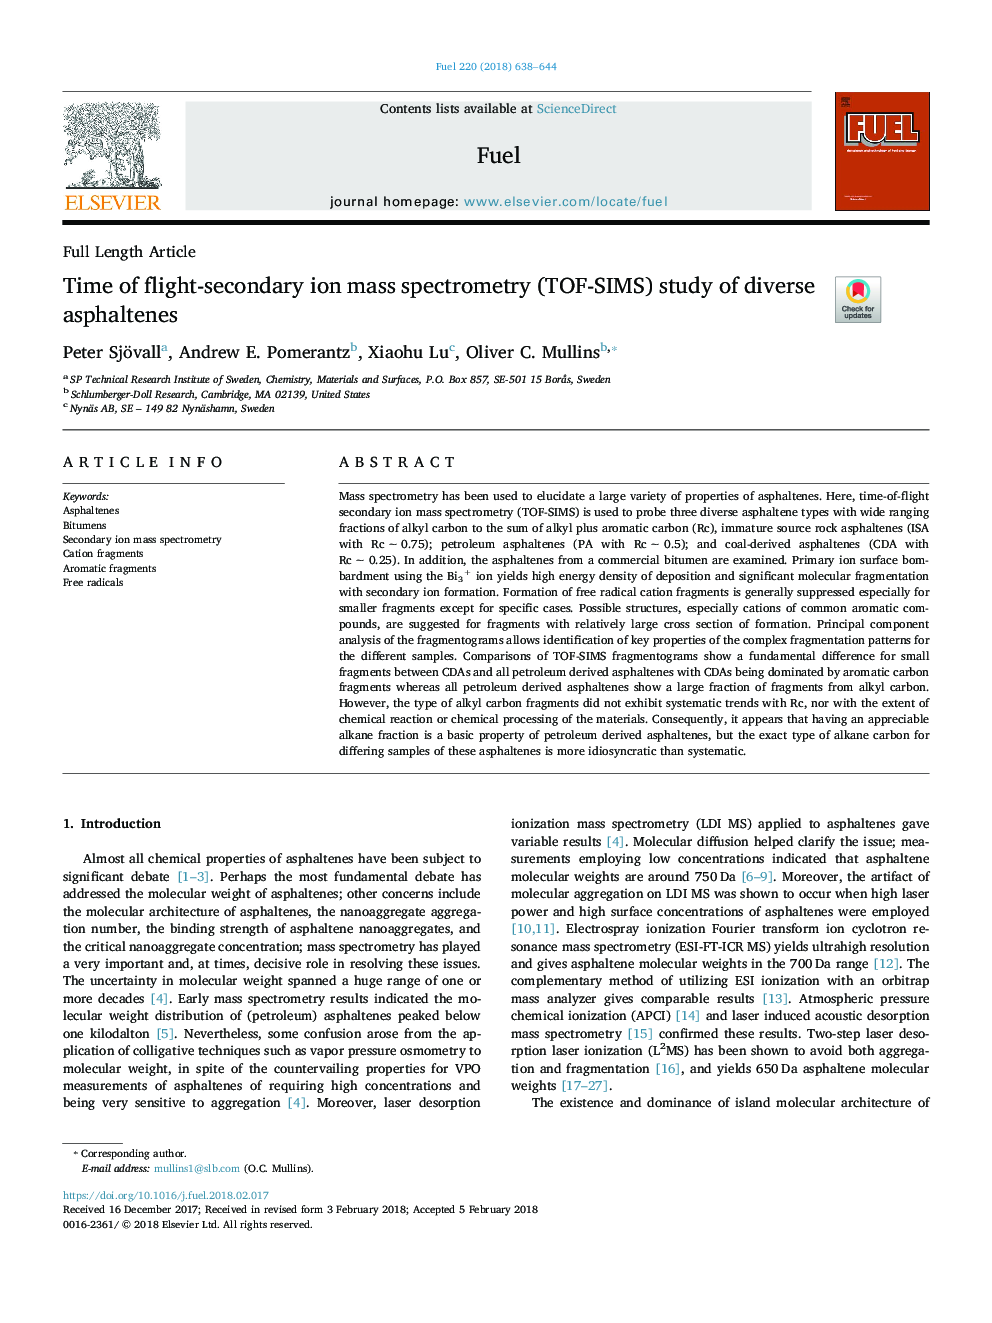 Time of flight-secondary ion mass spectrometry (TOF-SIMS) study of diverse asphaltenes